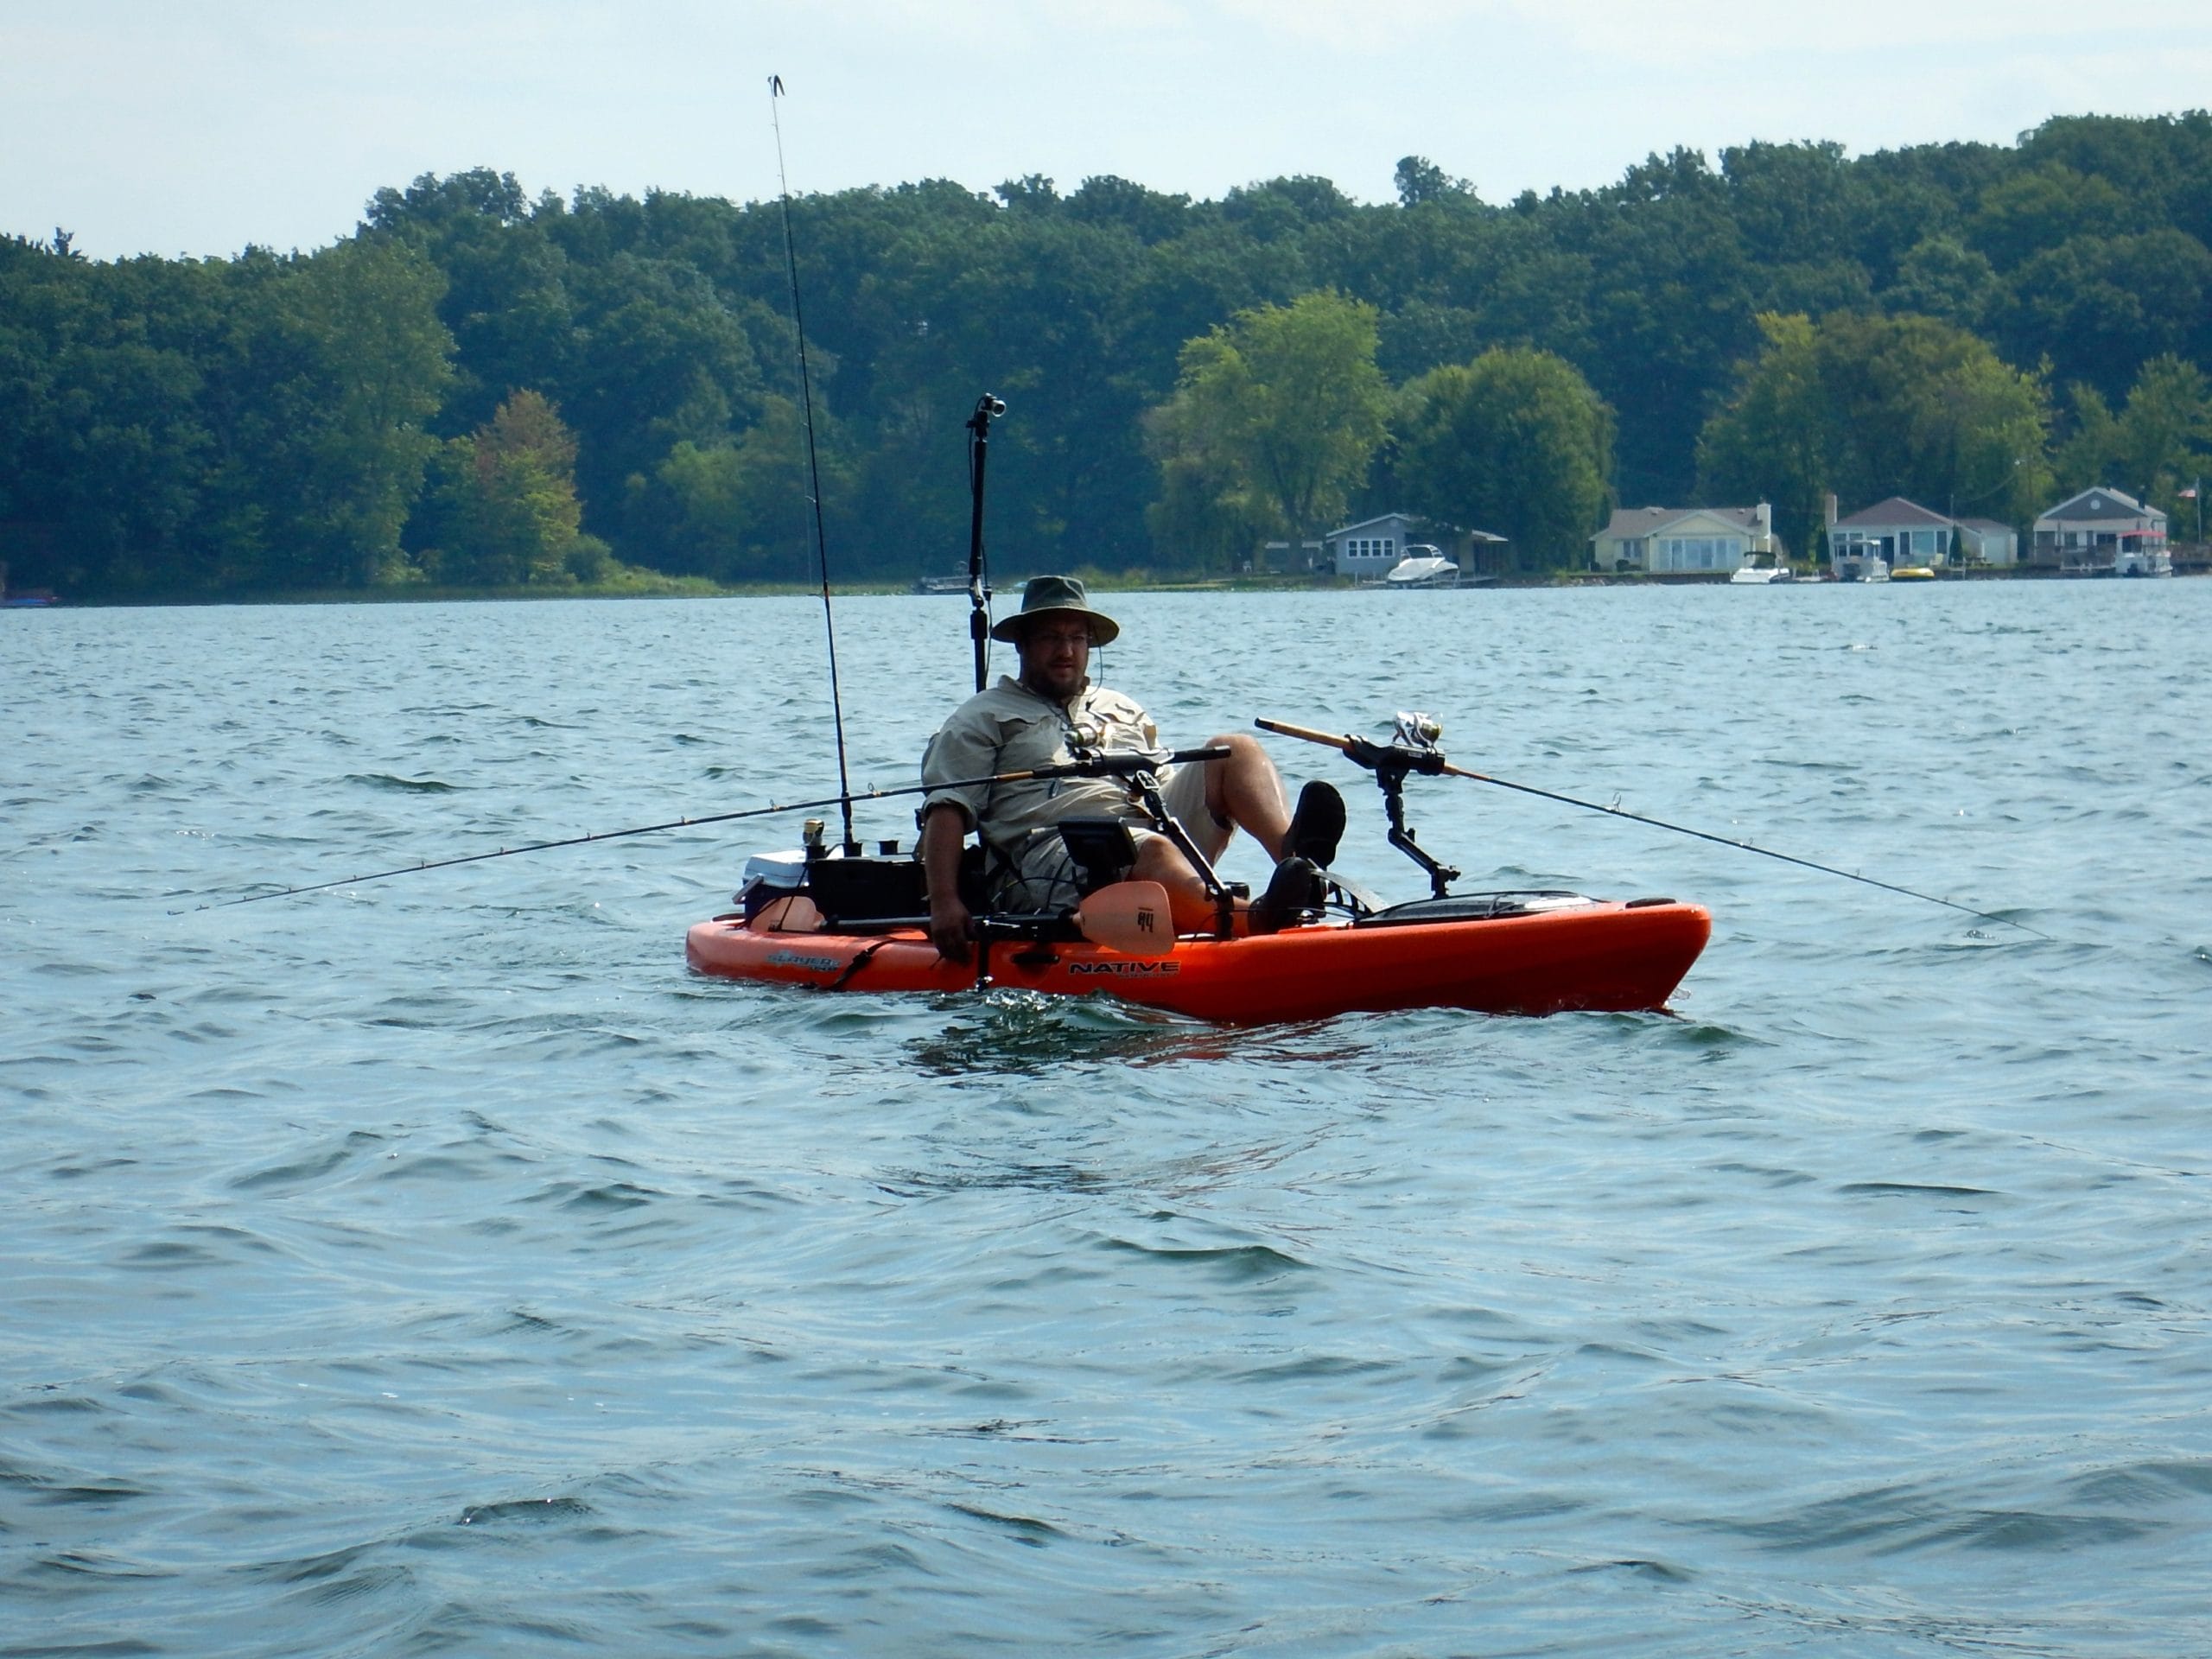 This angler in a Native Slayer 13 Propel kayak pedals as if in a bicycle to move ahead and pedals in reverse to back up.